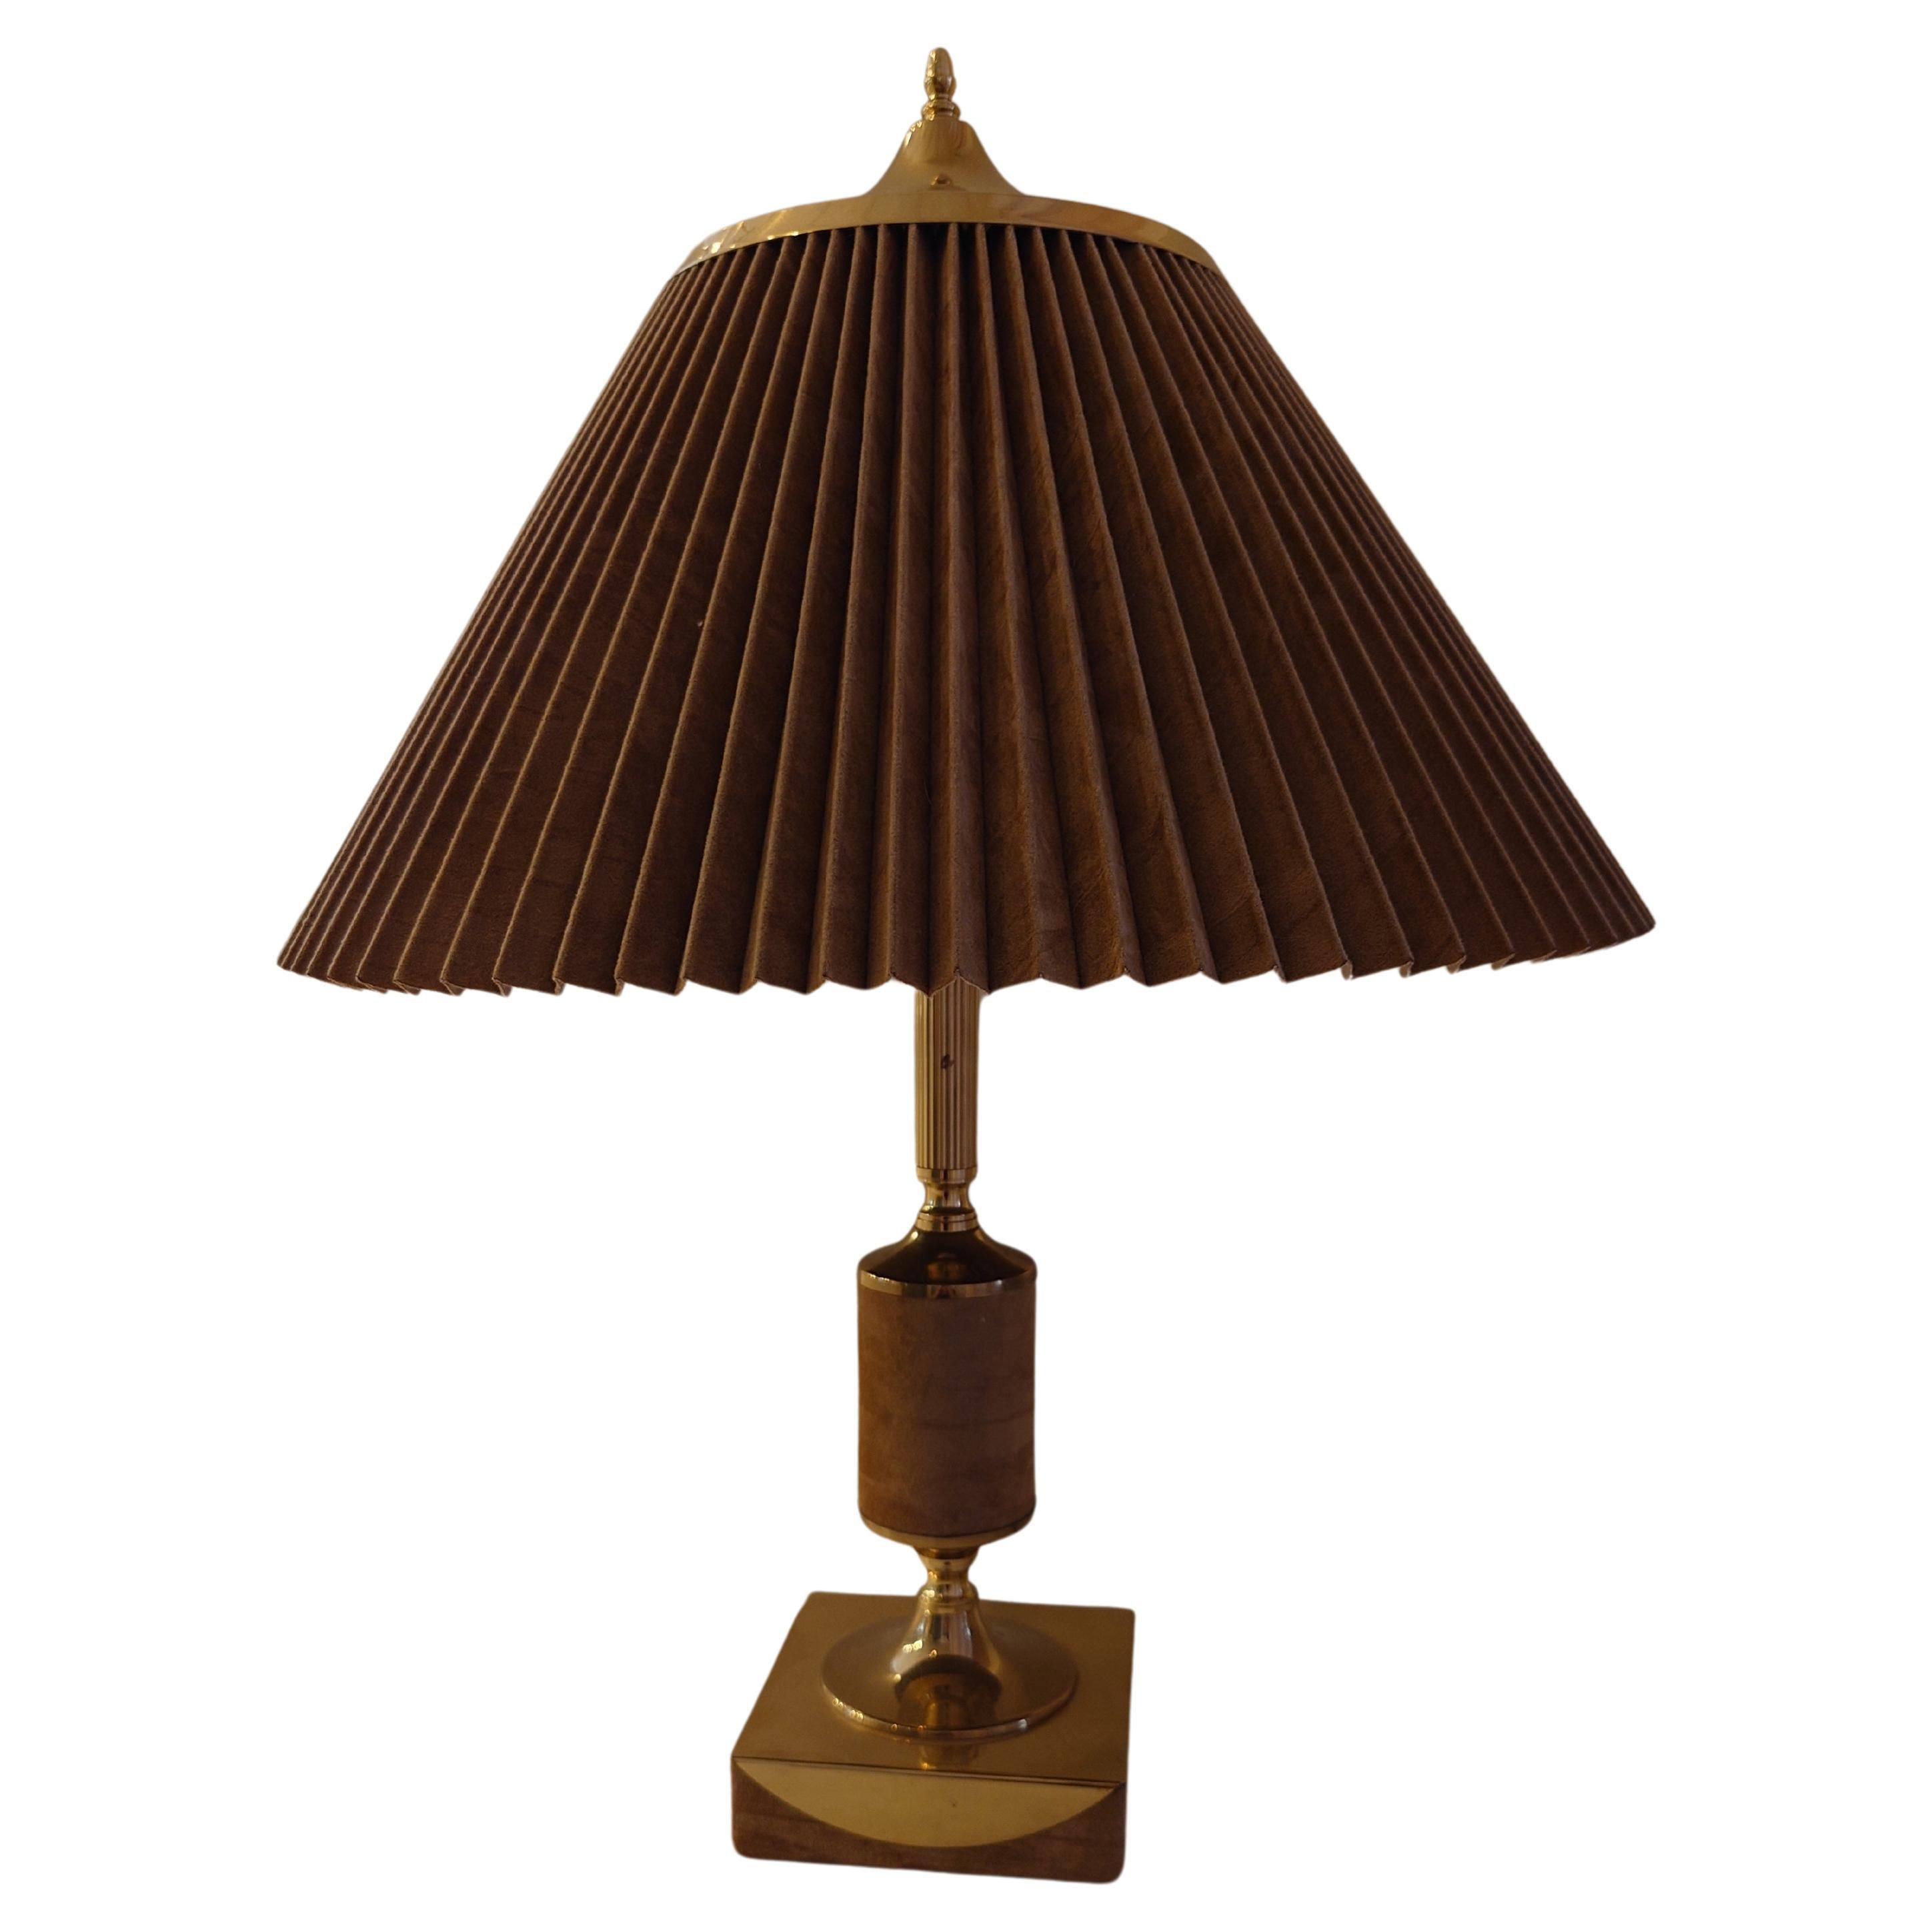  Tr & Co, Table Lamps, Brass, Norway, 1960s For Sale